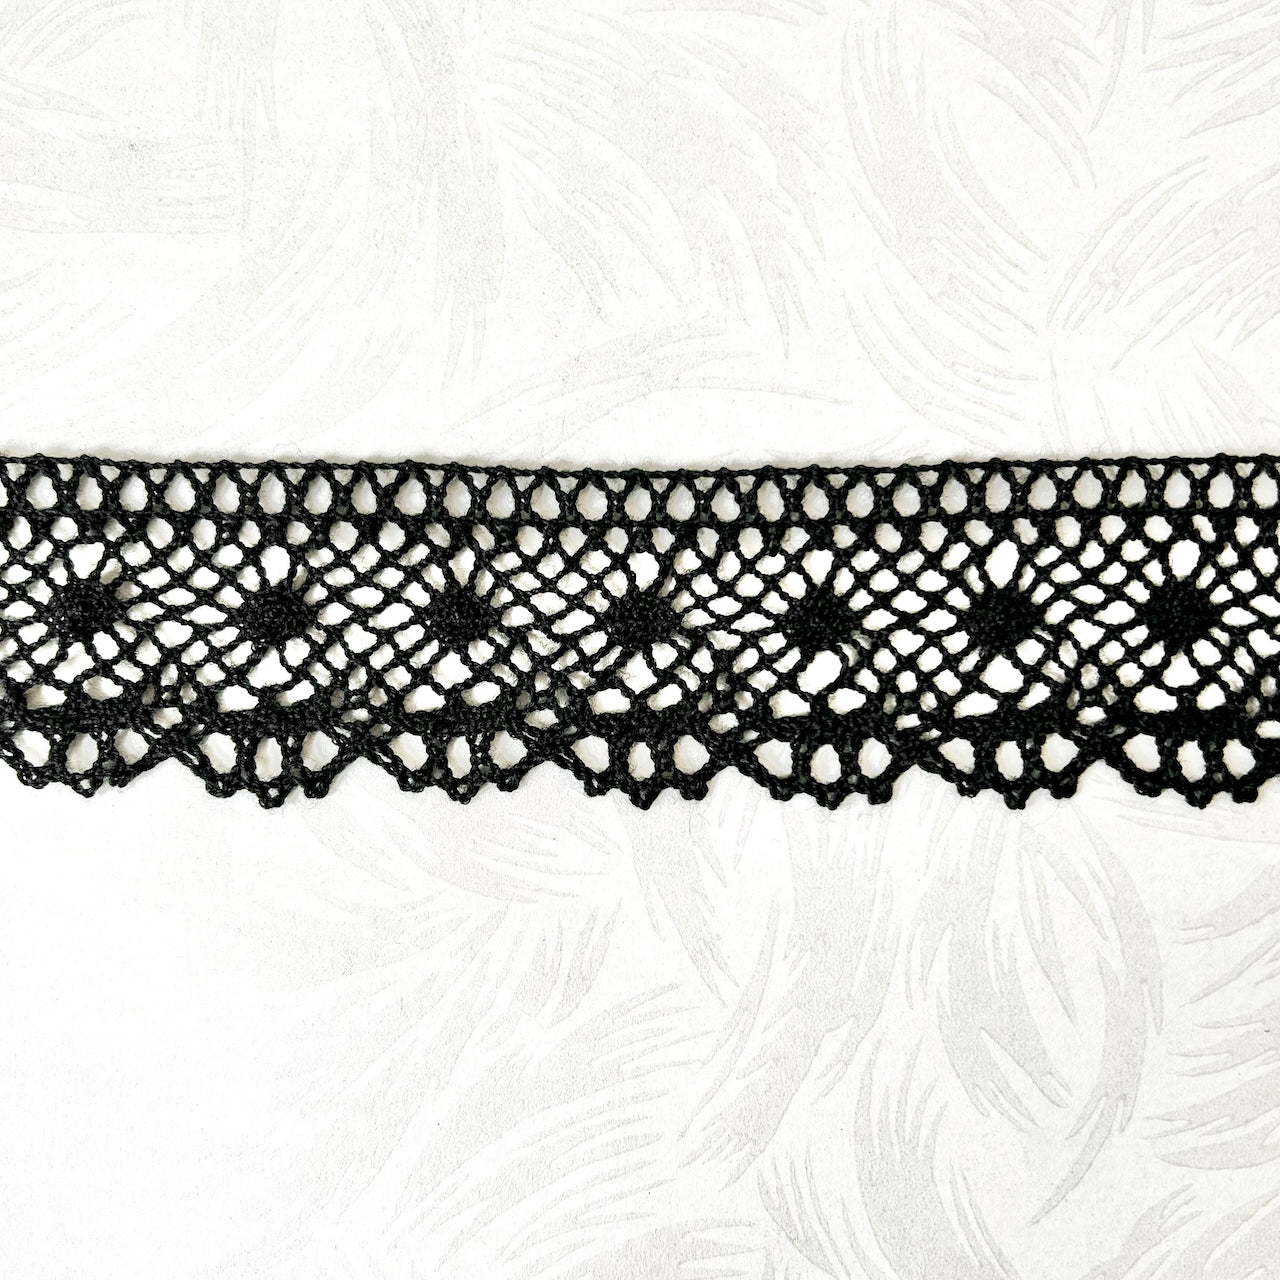    Scalloped_Wool_Cluny_Lace